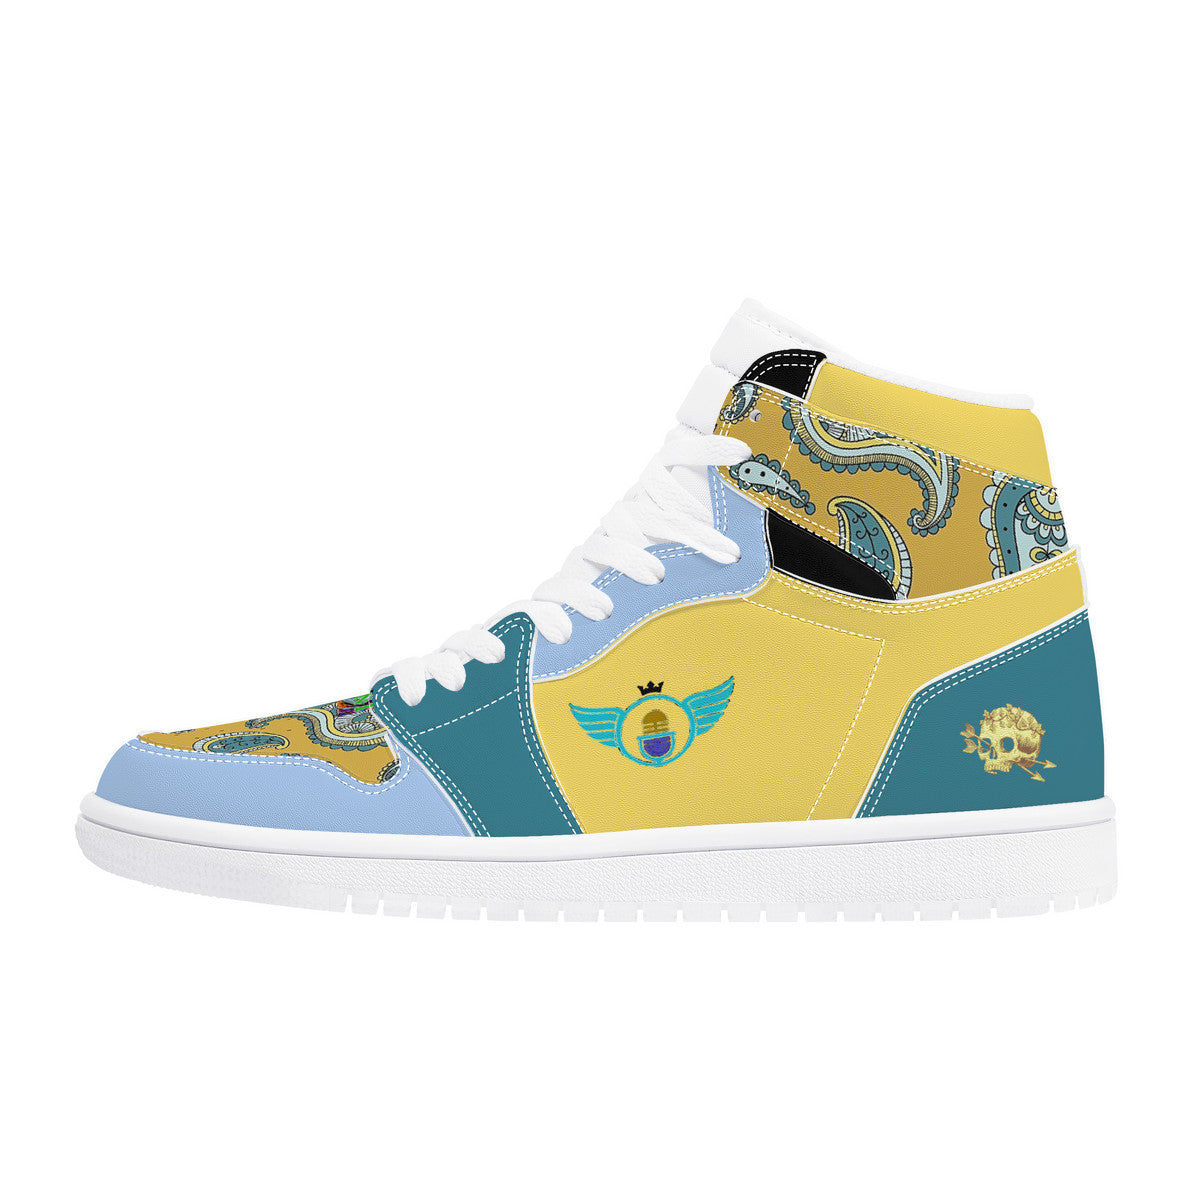 Paisley Gold Custom High Top Yellow and Blue Sneakers - Shoe Zero